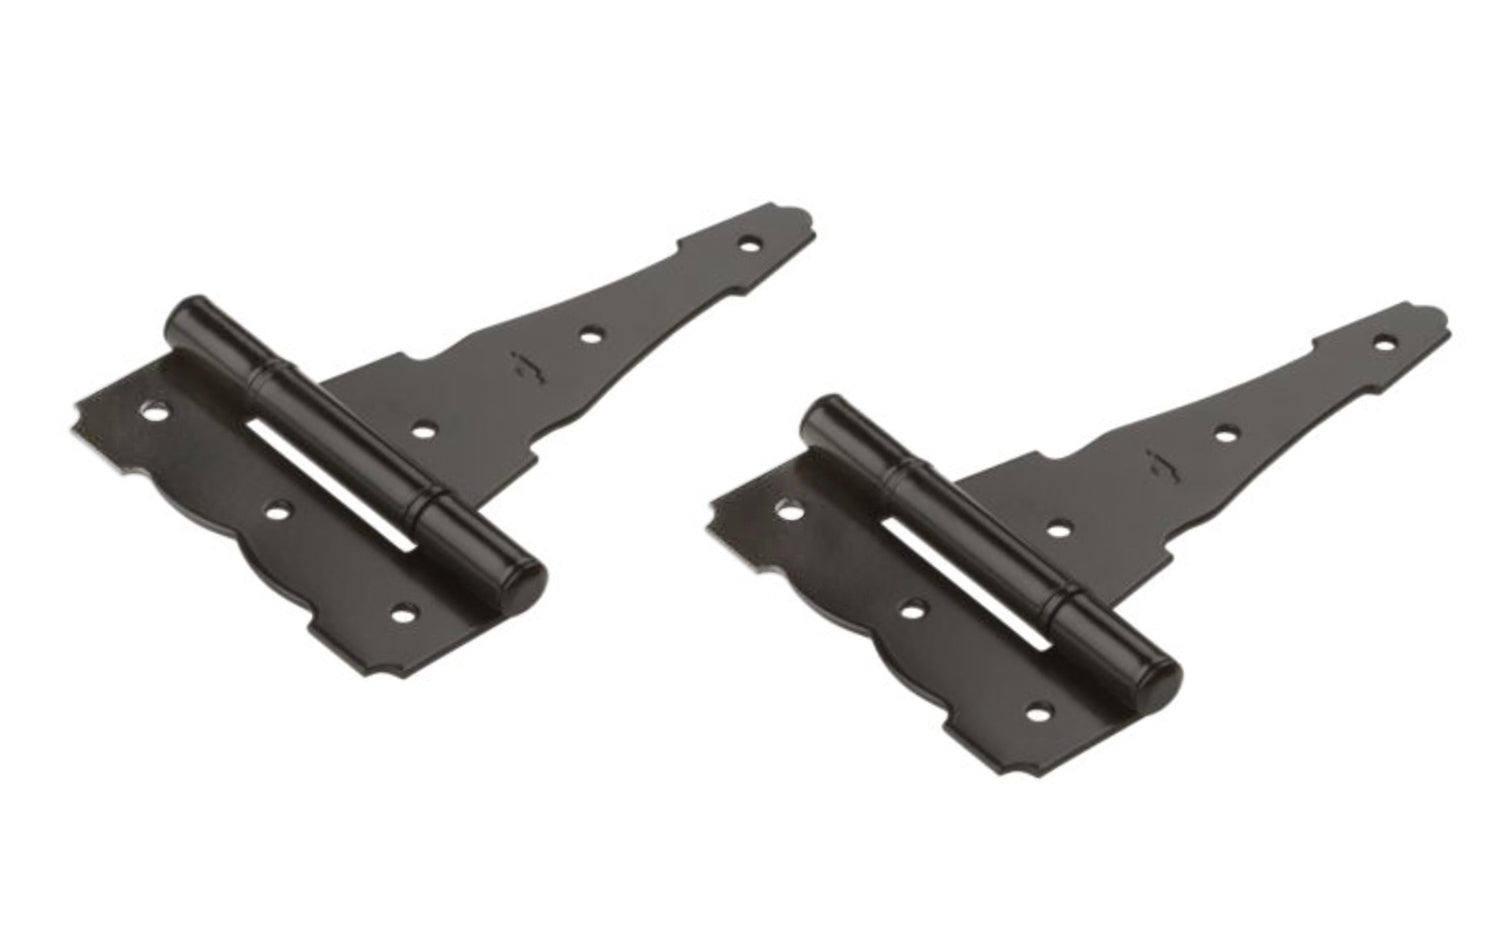 Black Finish Ornamental Reversible T-Hinges - 2 Pack. Heavy-duty for extra strength, for full surface applications. Designed for gates, doors, cabinets, & sheds. Bearing design eliminates metal to metal contact for smooth, quiet operation. Decorative design. National Hardware Catalog Model No. N881-912. 038613881914